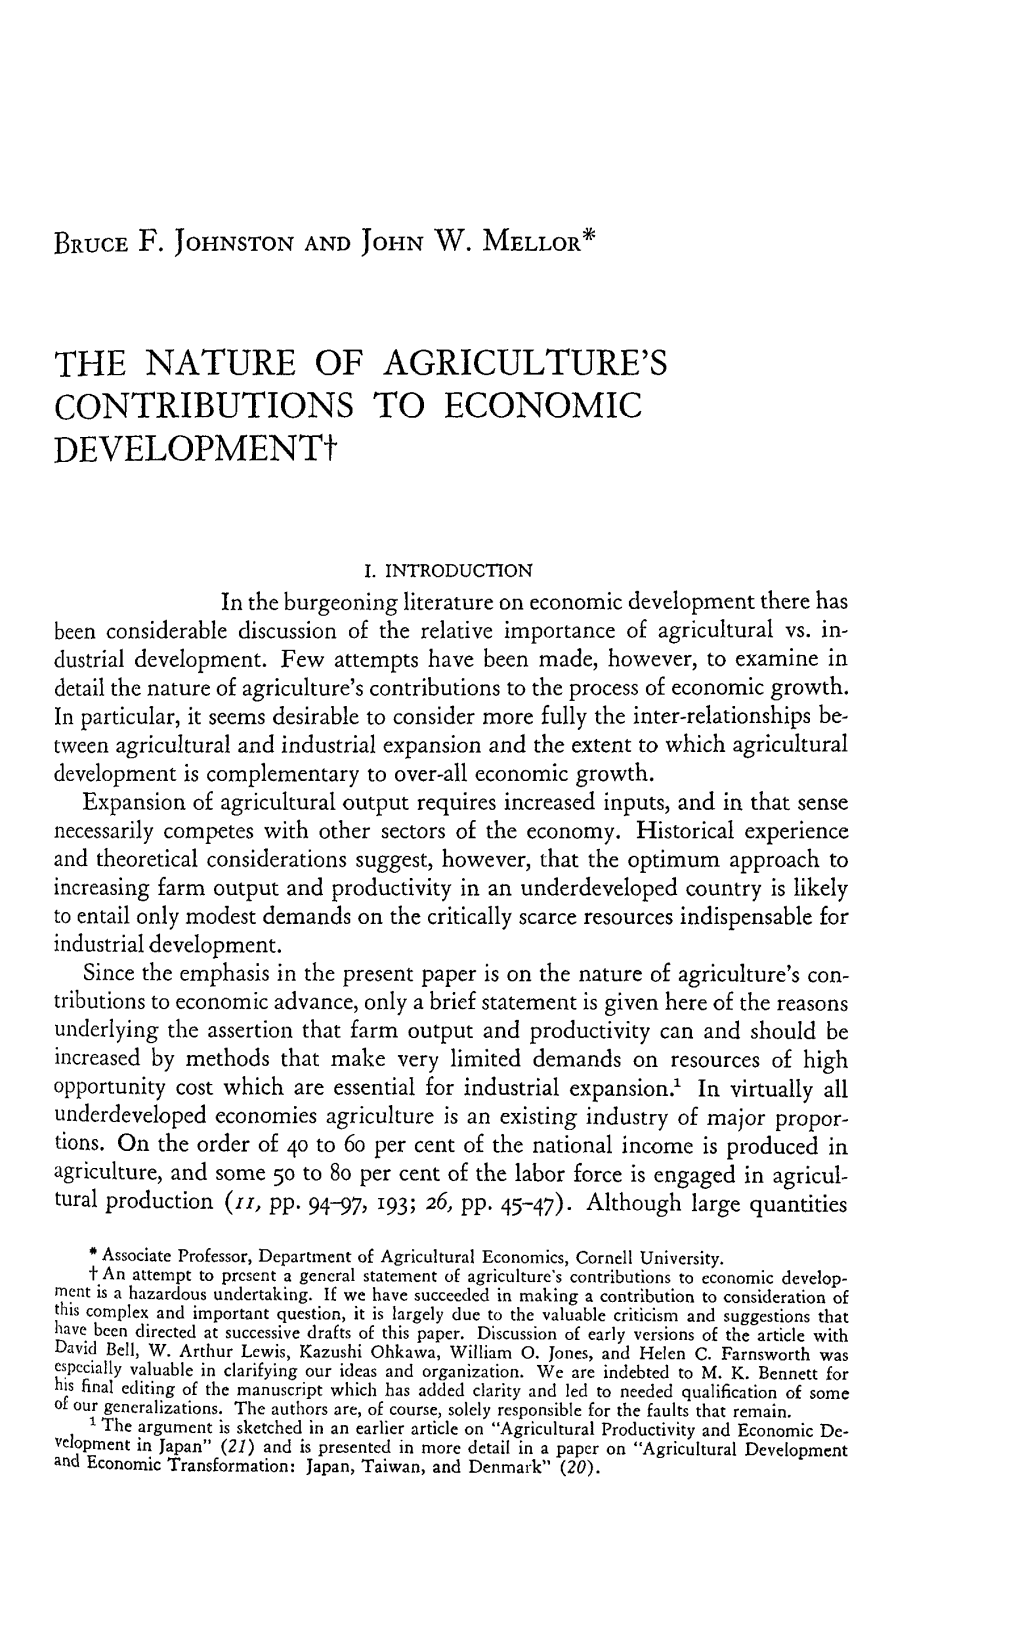 THE NATURE of AGRICULTURE's CONTRIBUTIONS to ECONOMIC Developmentt